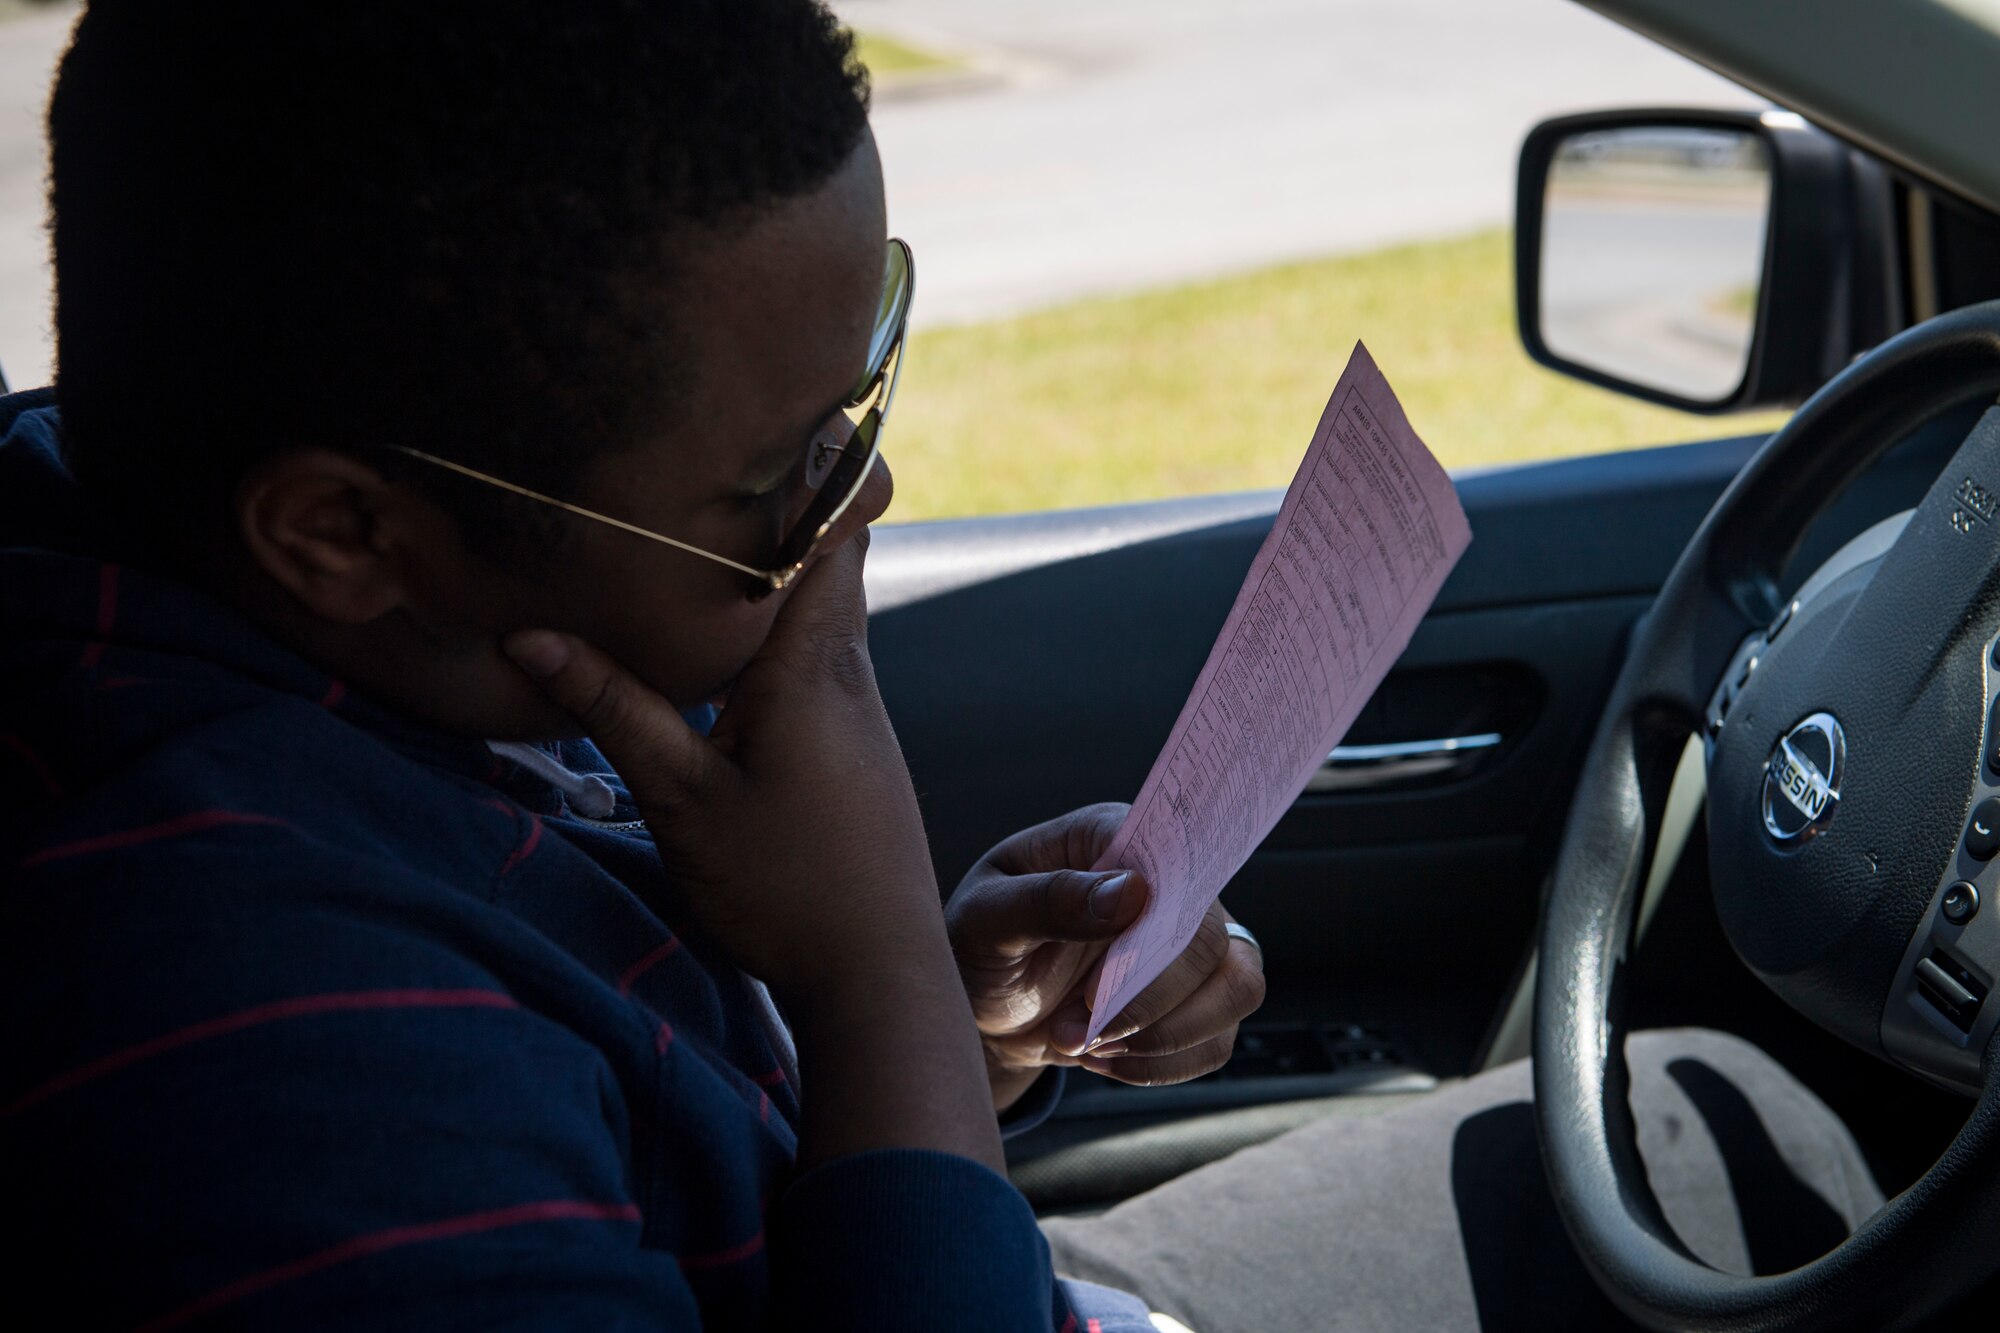 Airman 1st Class Eugene Oliver, 23d Wing photojournalist apprentice, reads a citation during a simulated distracted driving traffic stop, April 17, 2018, at Moody Air Force Base, Ga. Since January 2018 there have been 13 distracted driving incidents at Moody, which has prompted the SFS patrolmen to heavily enforce distracted driver consequences for motorists on the installation. (U.S. Air Force photo by Senior Airman Janiqua P. Robinson)